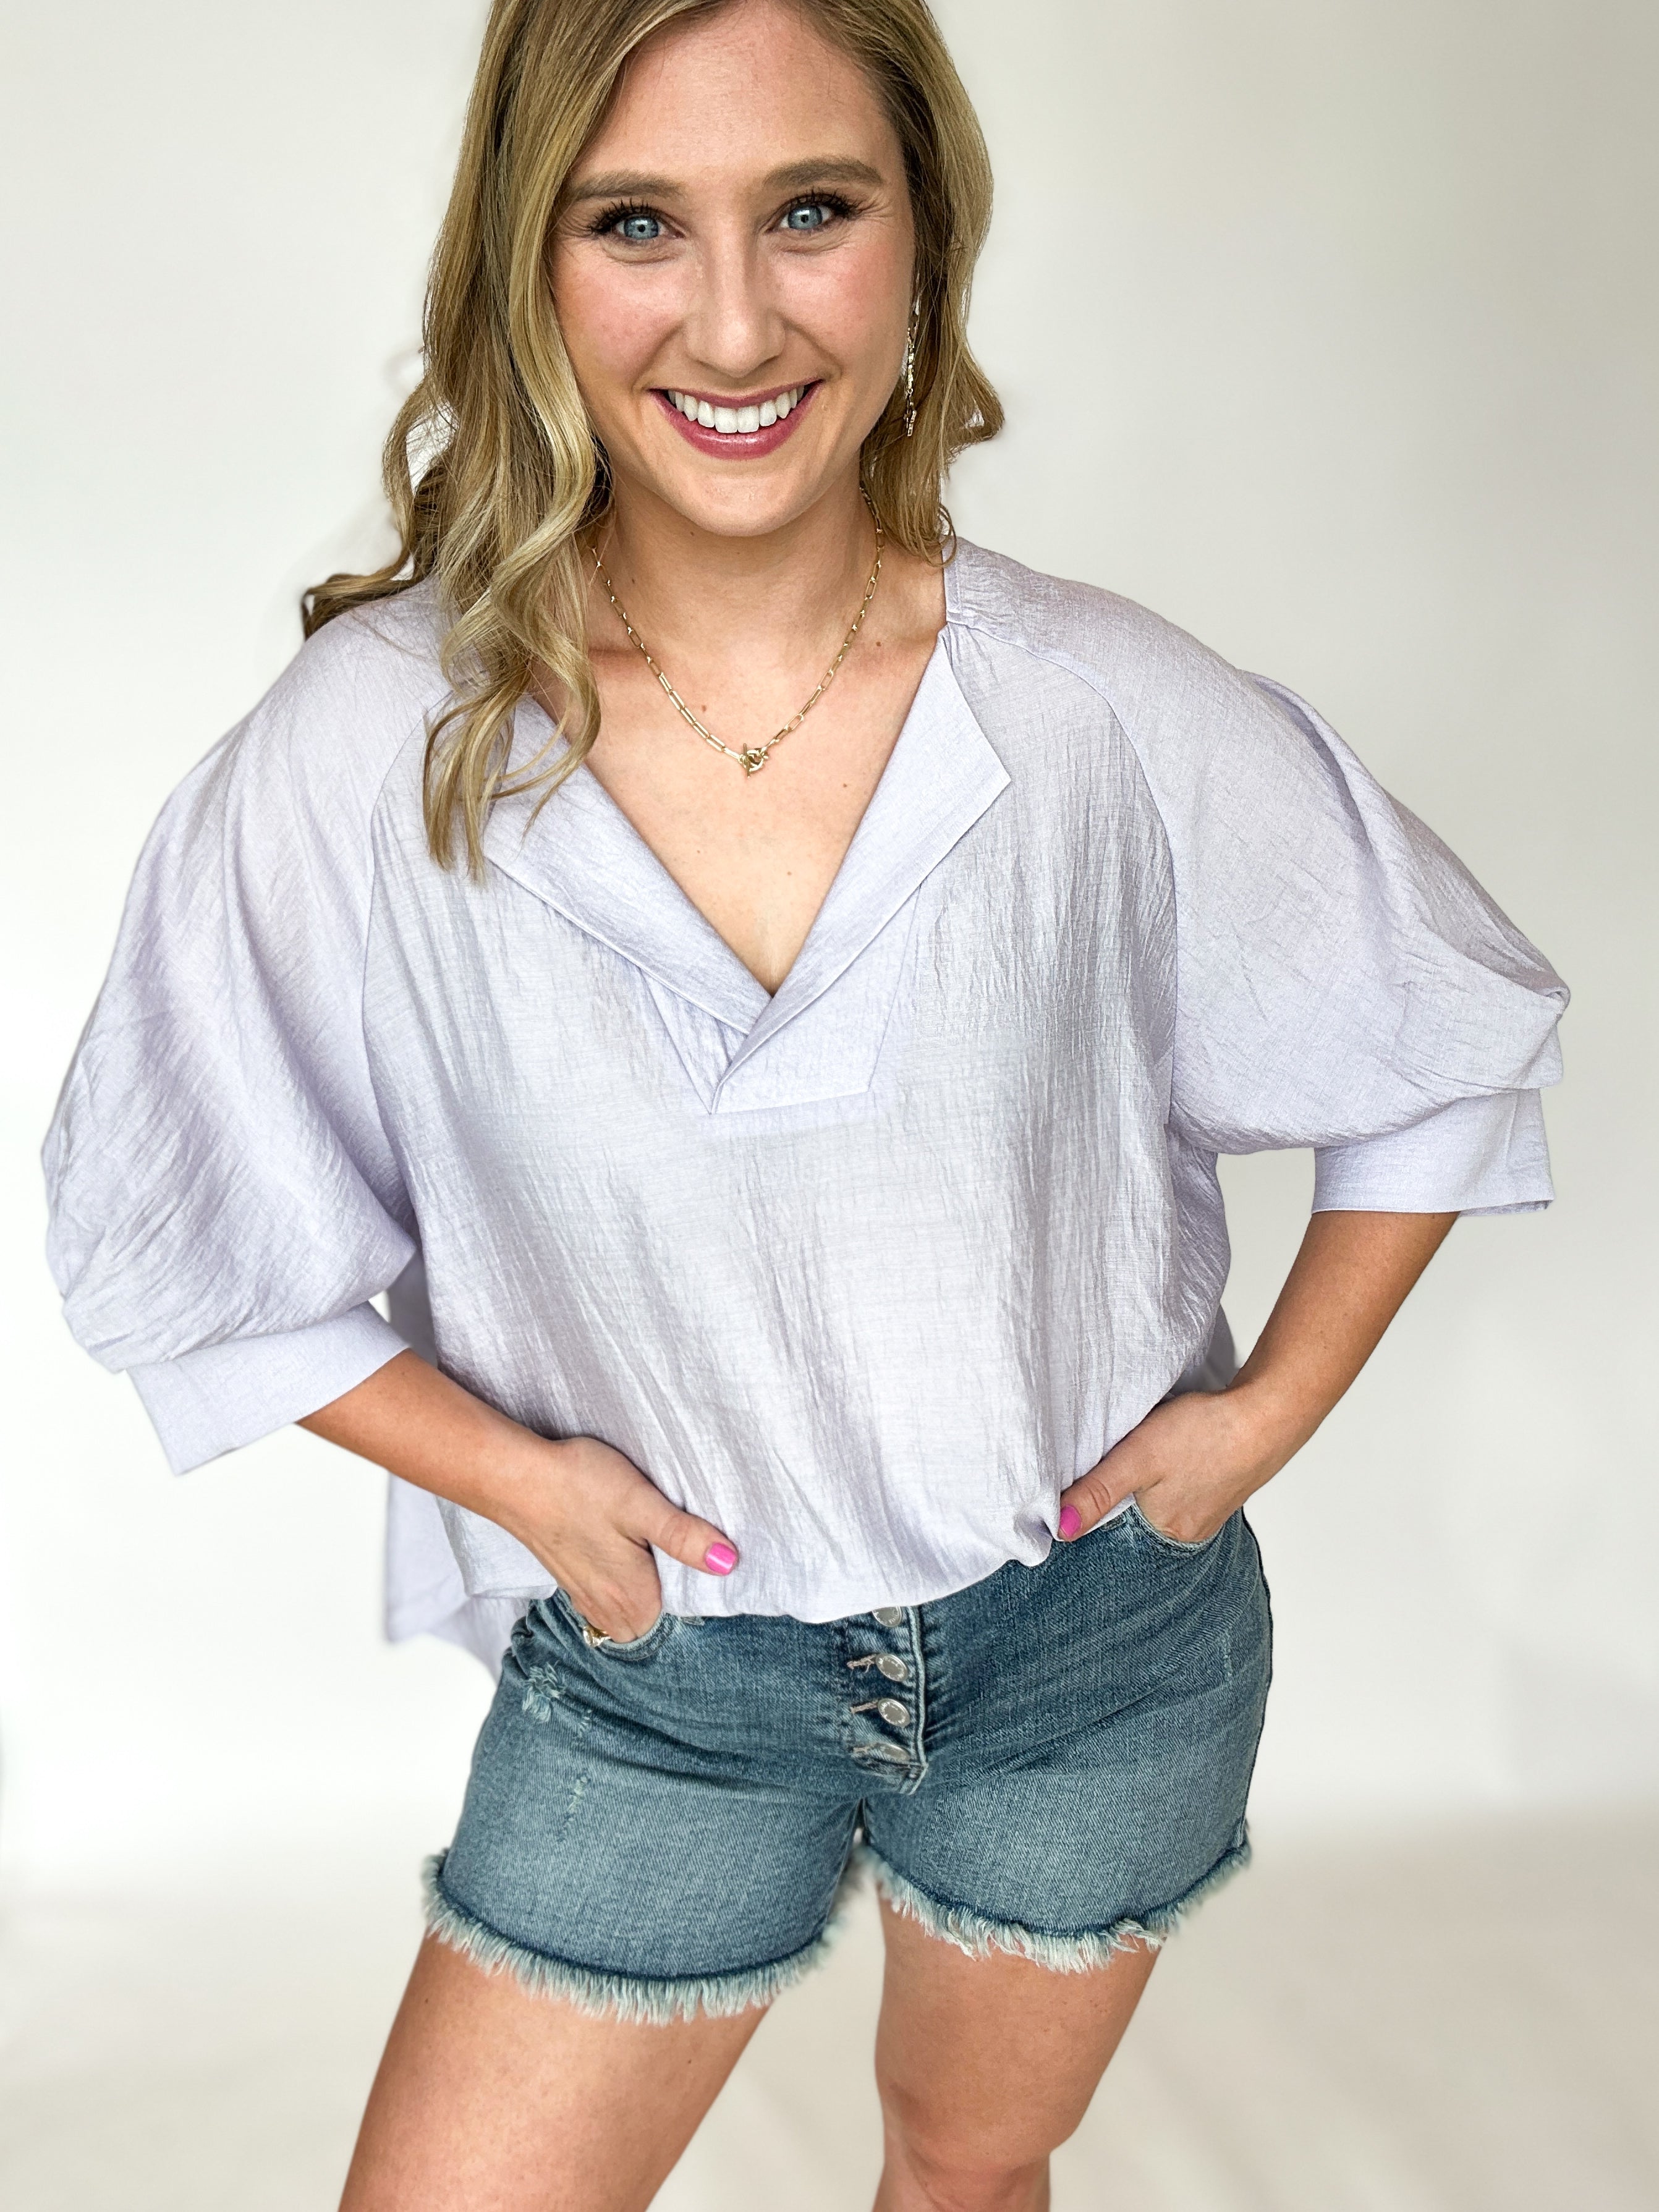 Oversized Collared Blouse - Lilac-200 Fashion Blouses-ALLIE ROSE-July & June Women's Fashion Boutique Located in San Antonio, Texas